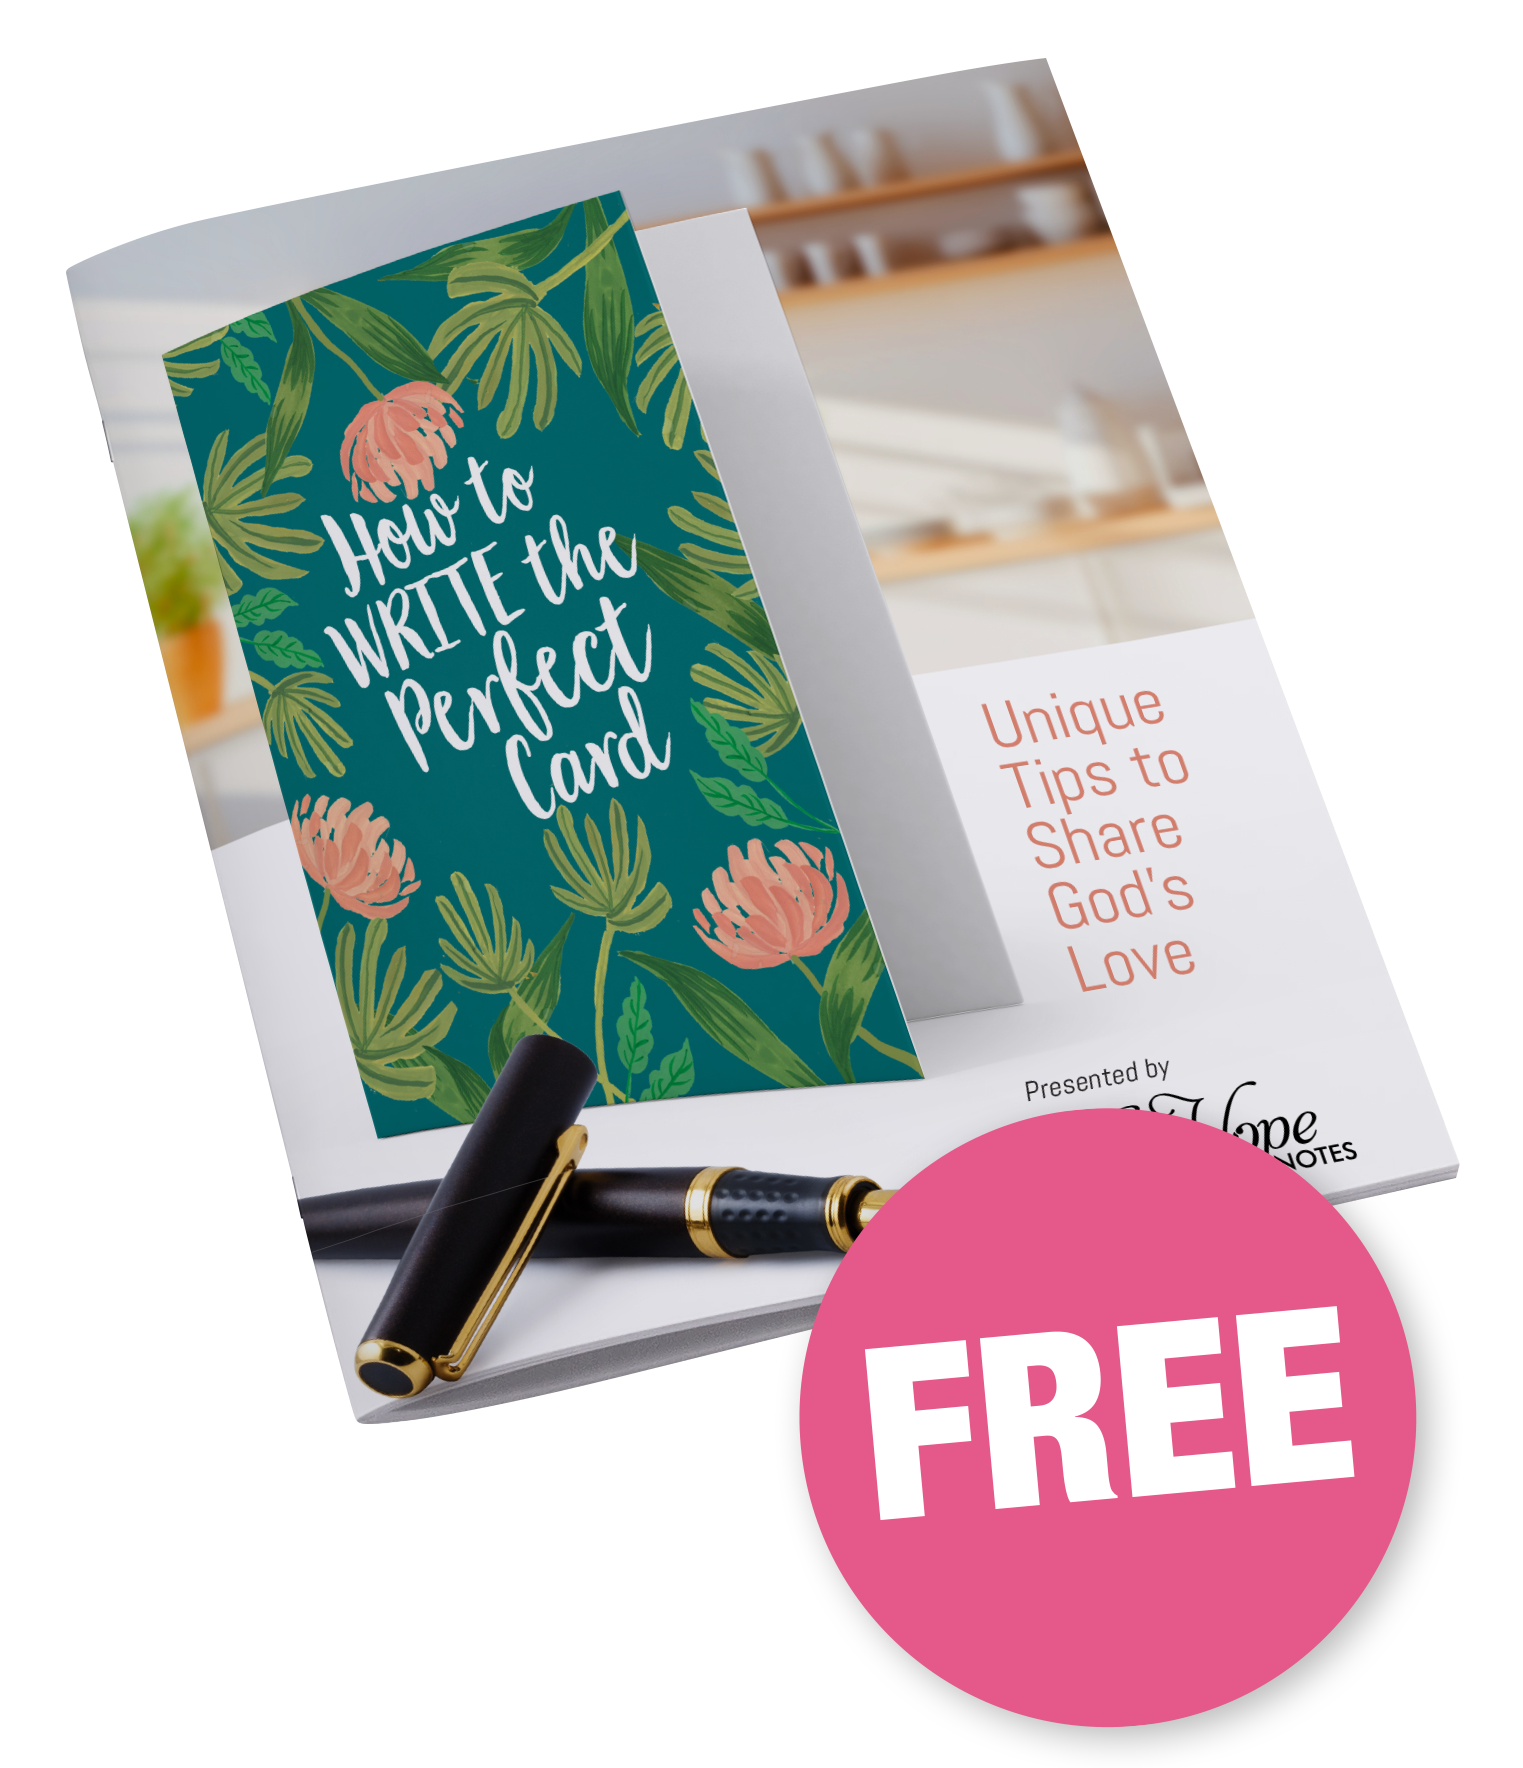 FREE BOOKLET DOWNLOAD